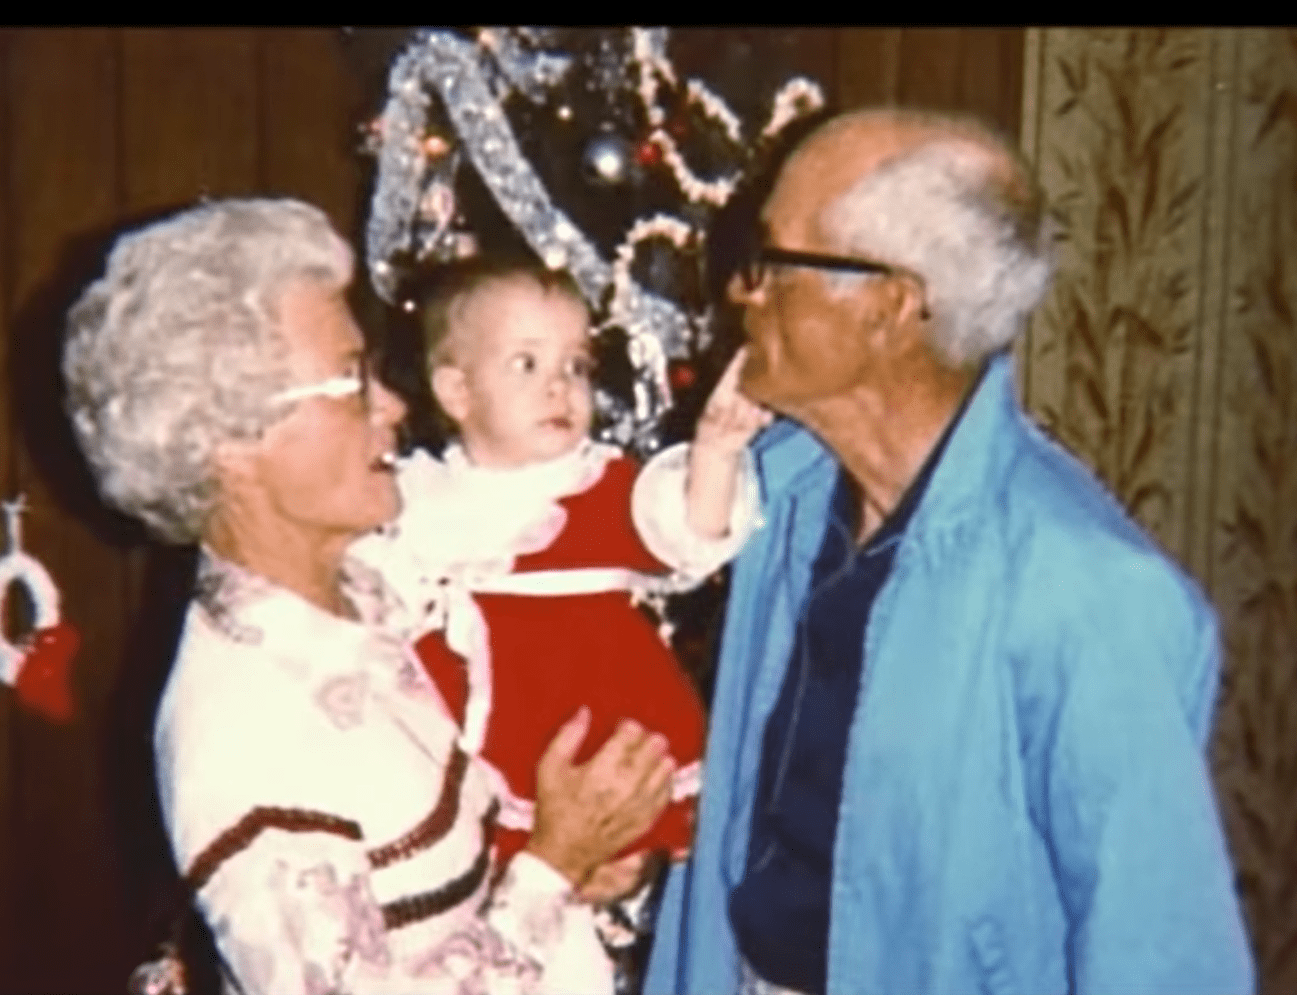 Kim Mays and her grandparents when she was a child. | Source: youtube.com/ABC News